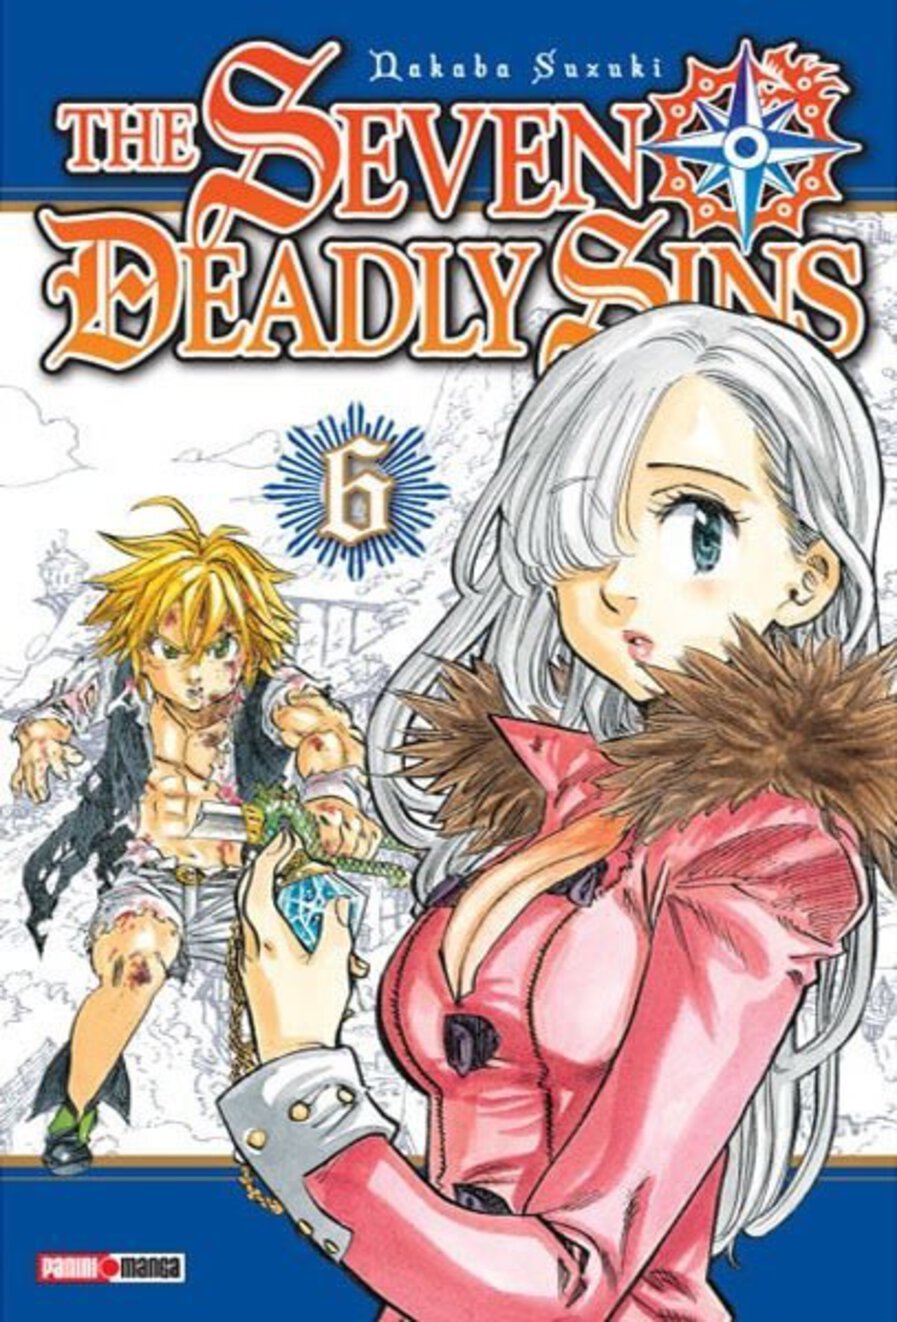 THE SEVEN DEADLY SINS N.6